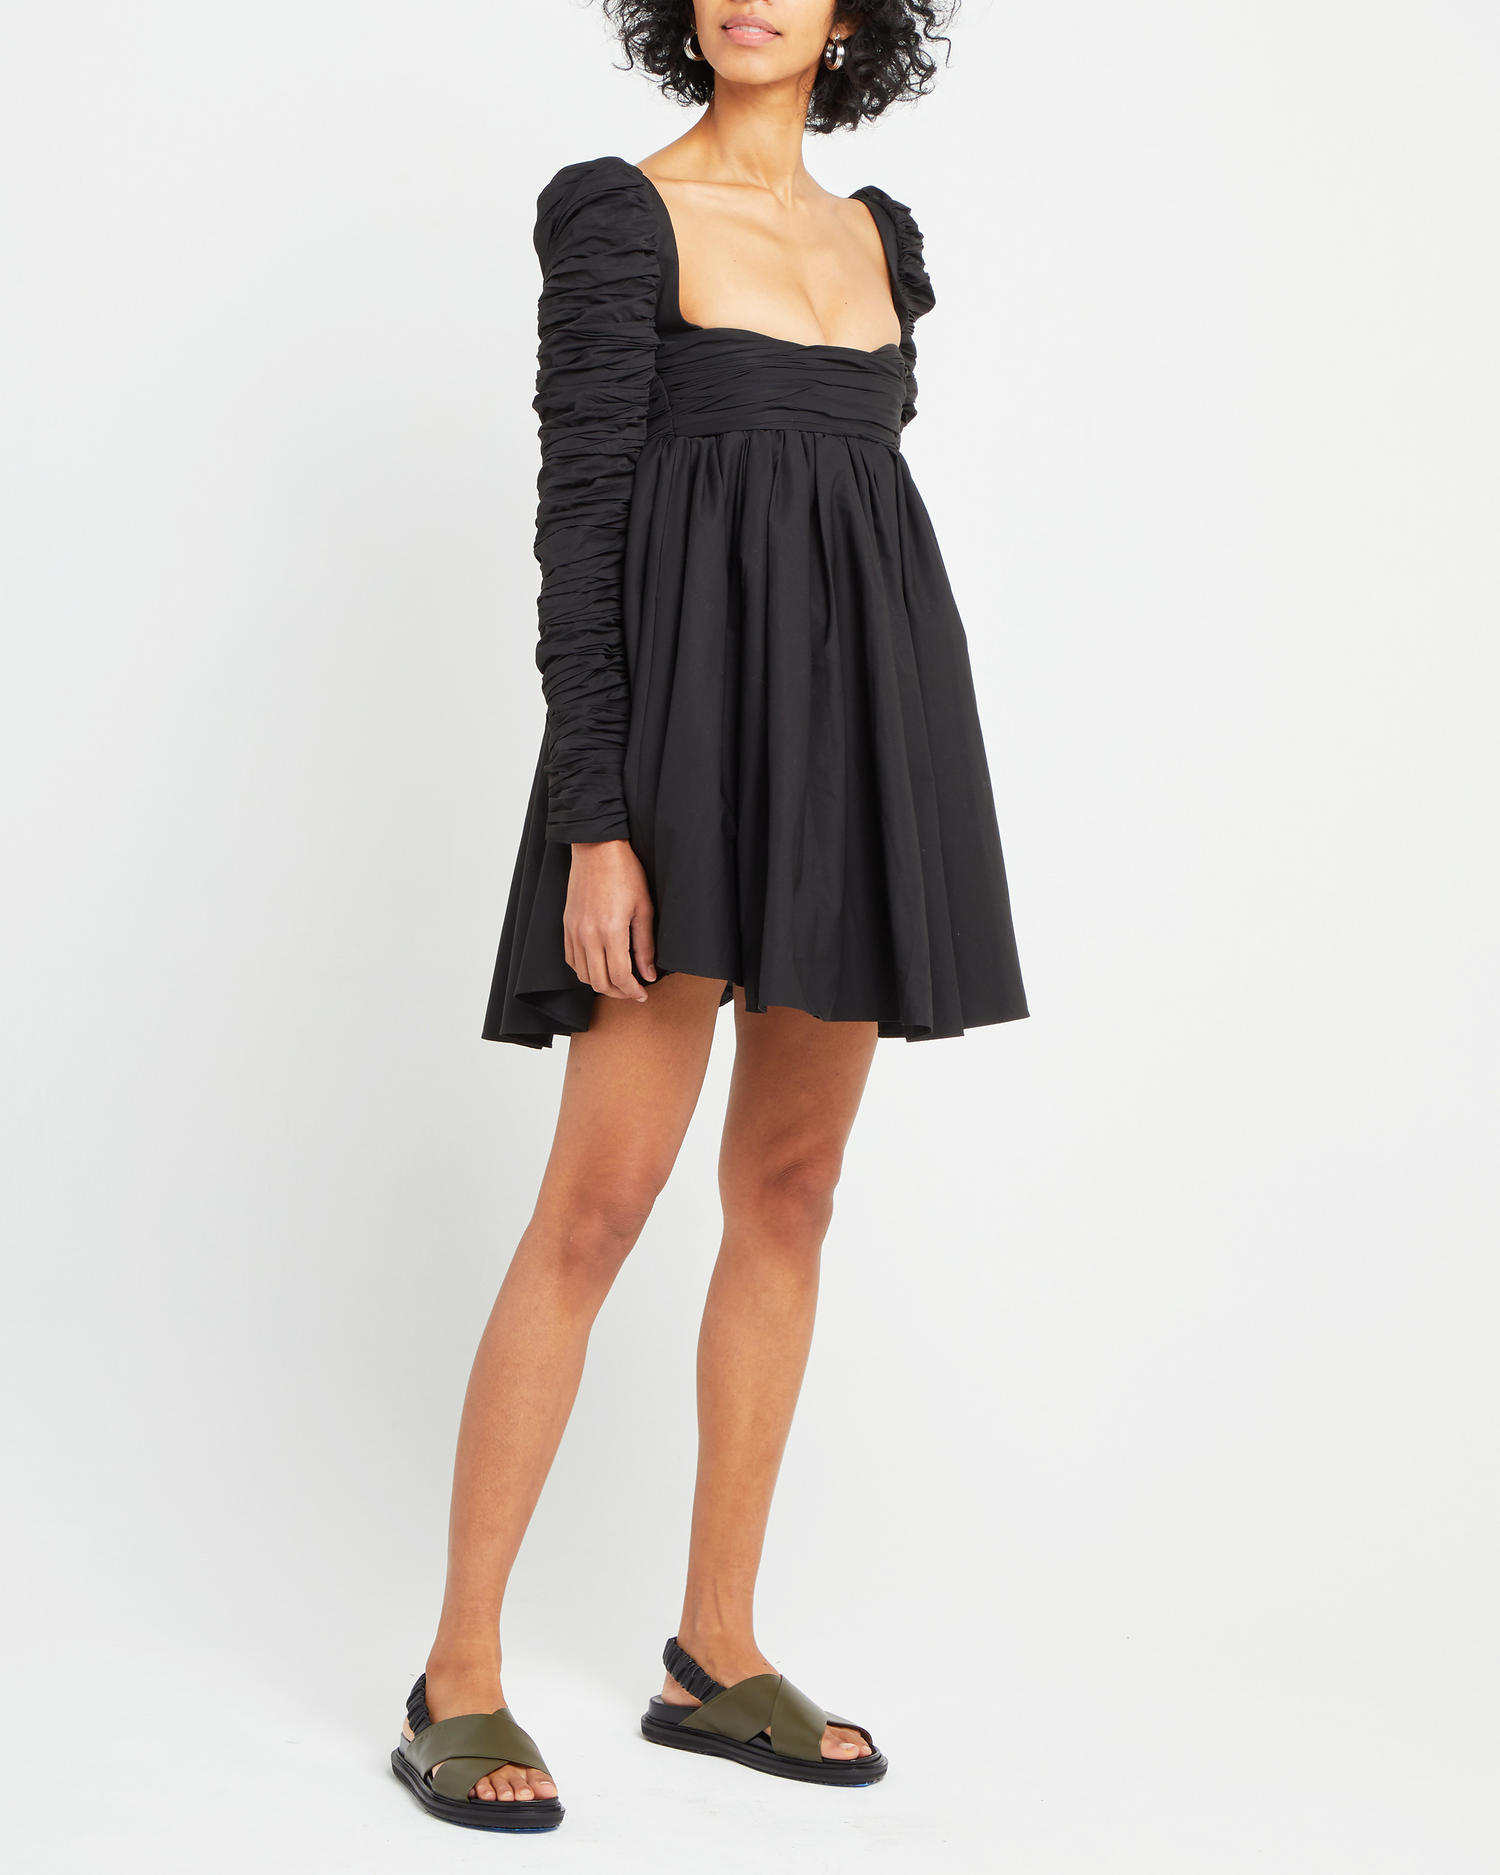 Third image of Structured Long-Sleeve Frock, a black mini dress, babydoll silhouette, long ruched sleeves, square neckline